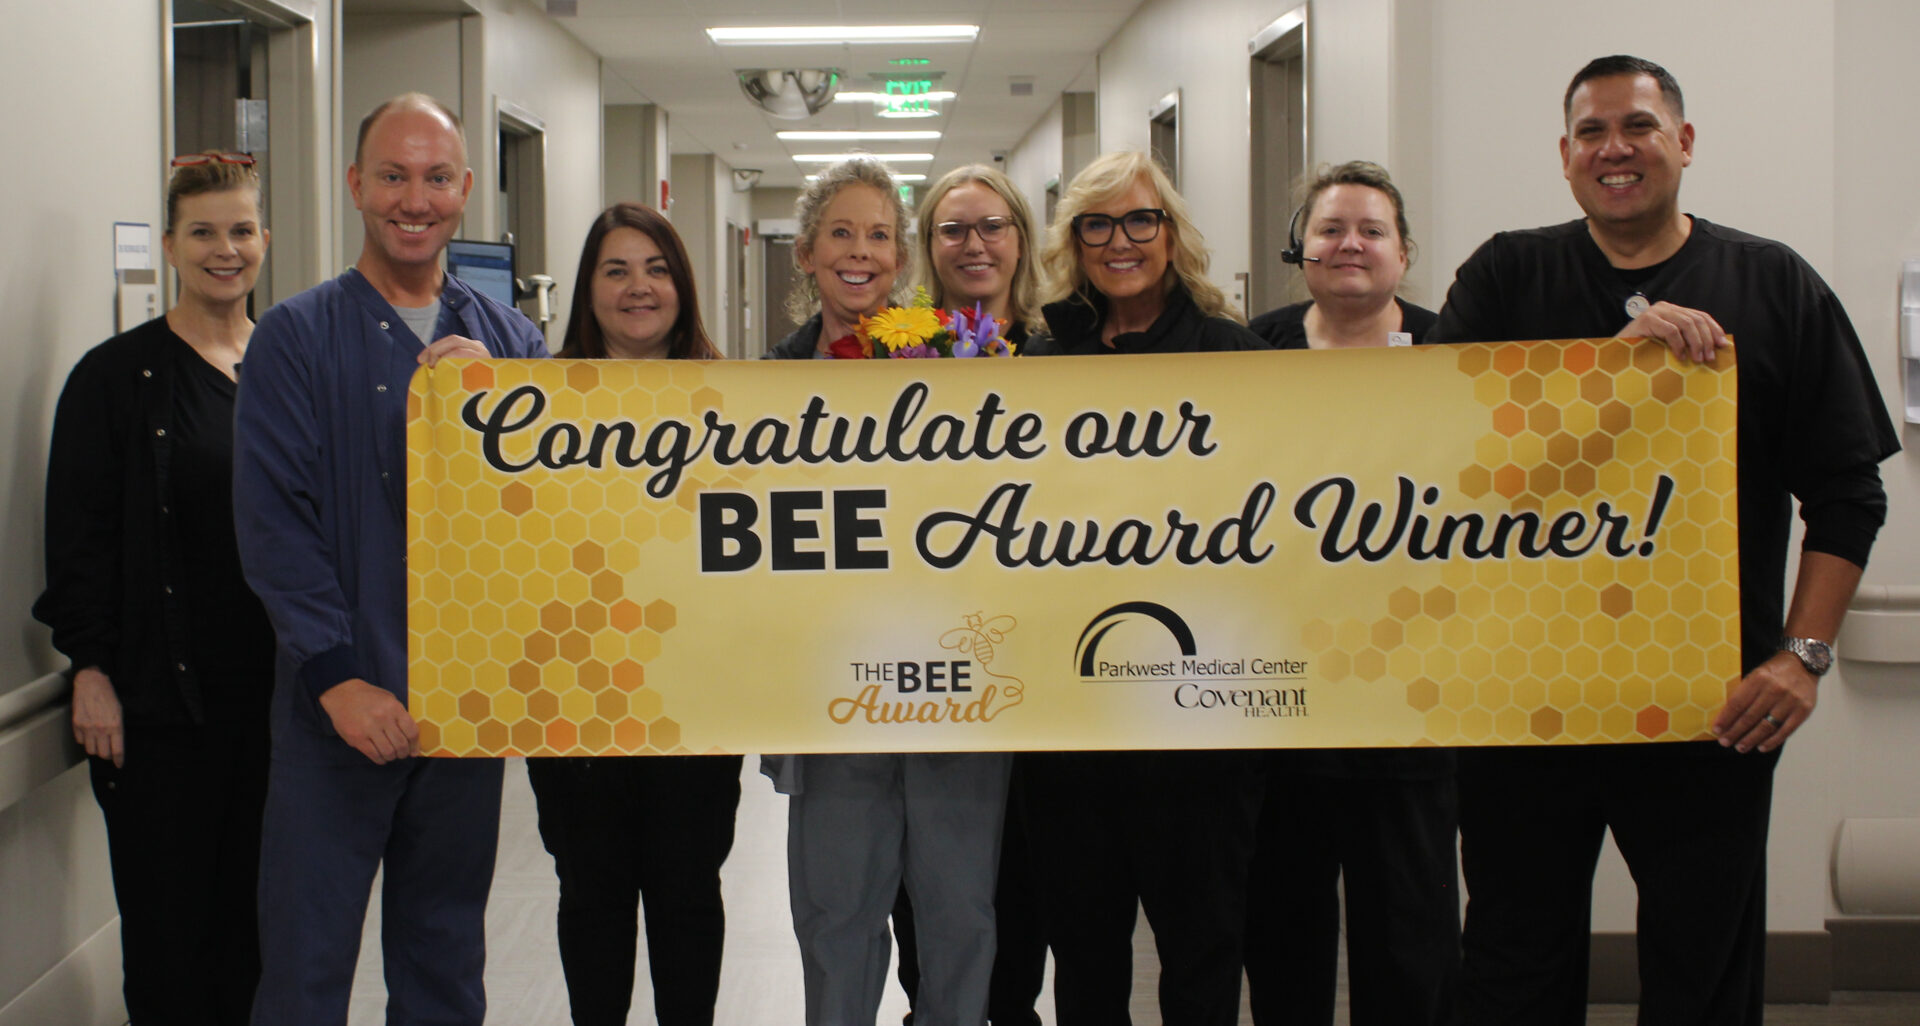 Linda is pictured with leadership team and co-workers holding the BEE banner for group photo.